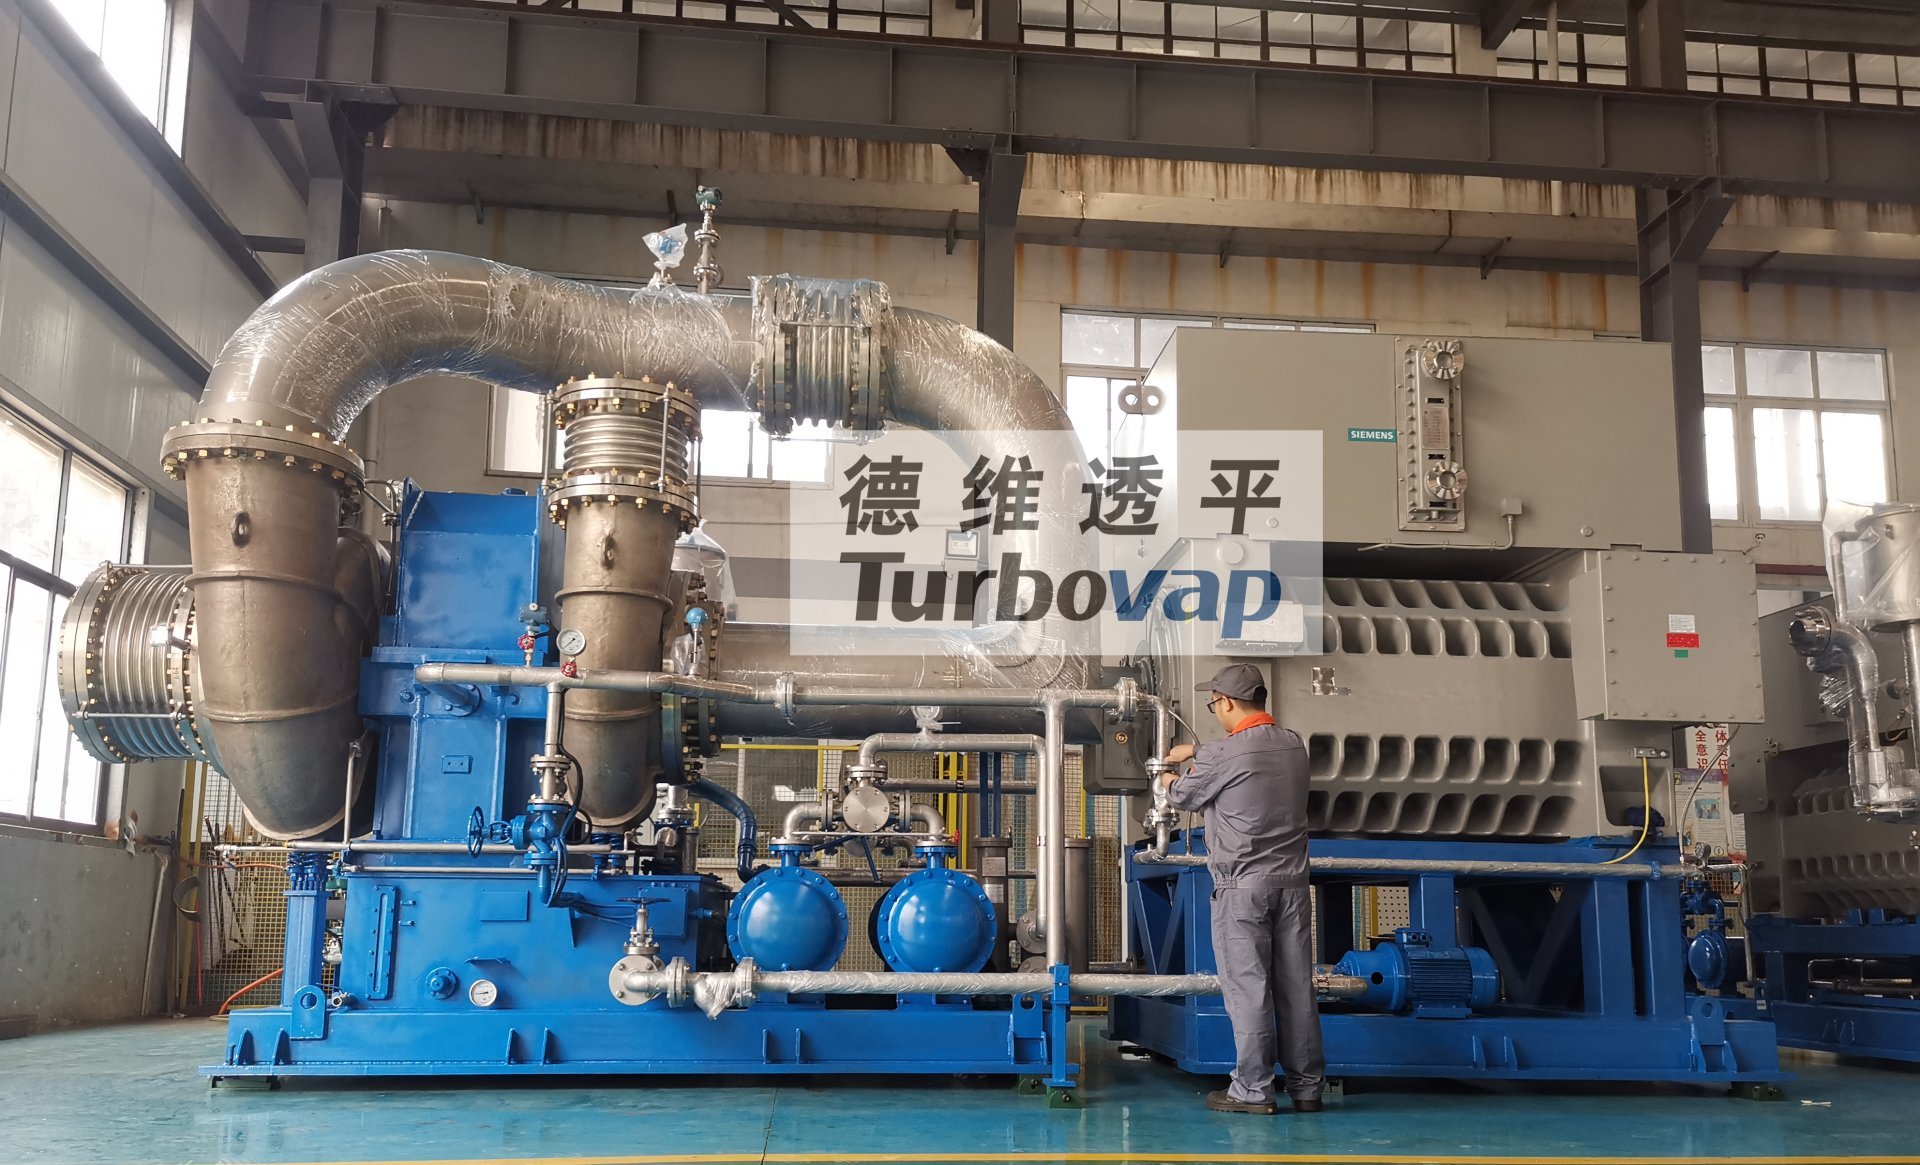 Turbovap 5100kW high-power centrifugal steam compressor factory acceptance successfully